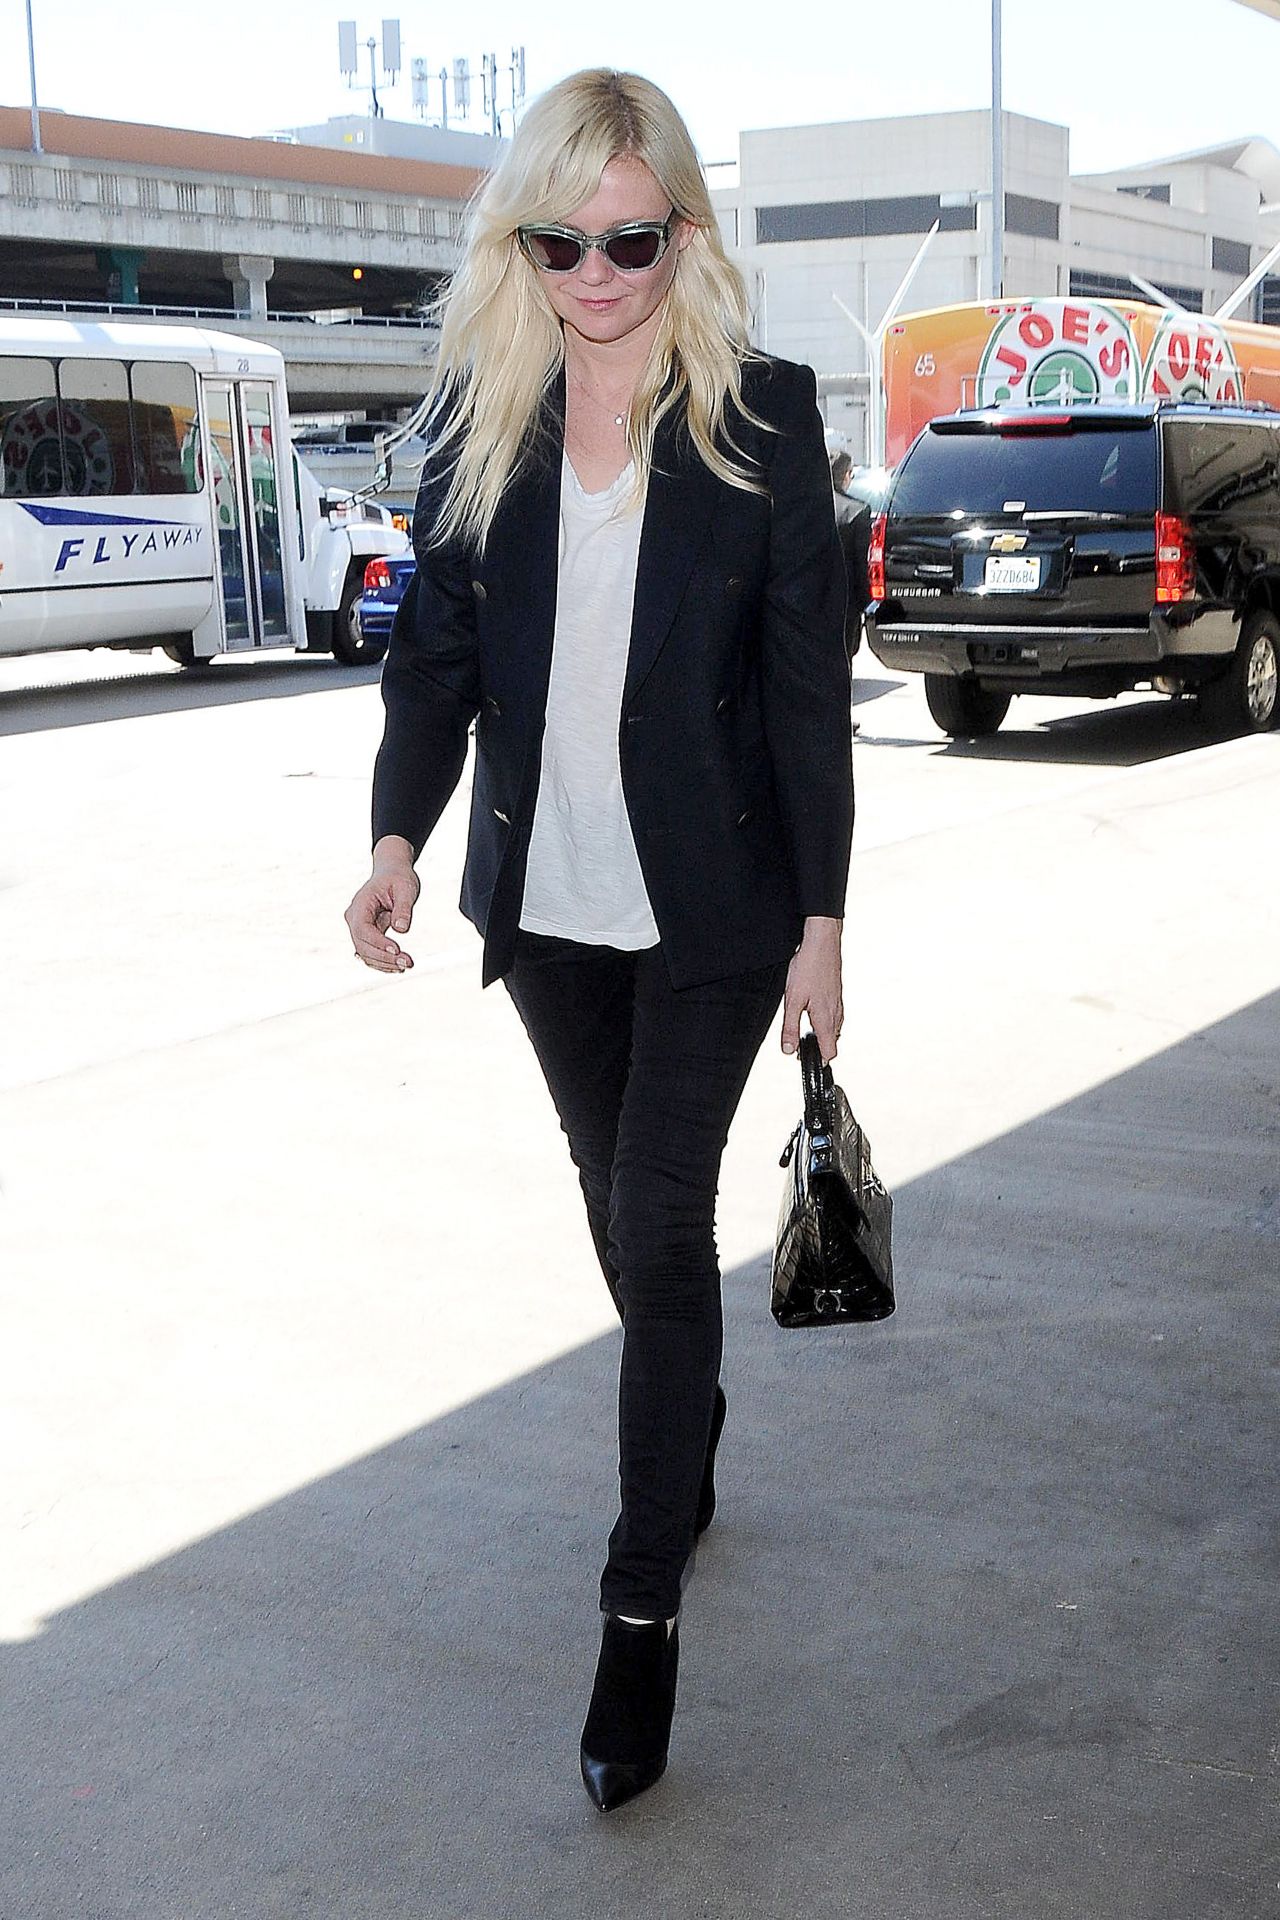 Kirsten Dunst Arriving at LAX Airport to Catch a Flight in Los Angeles ...